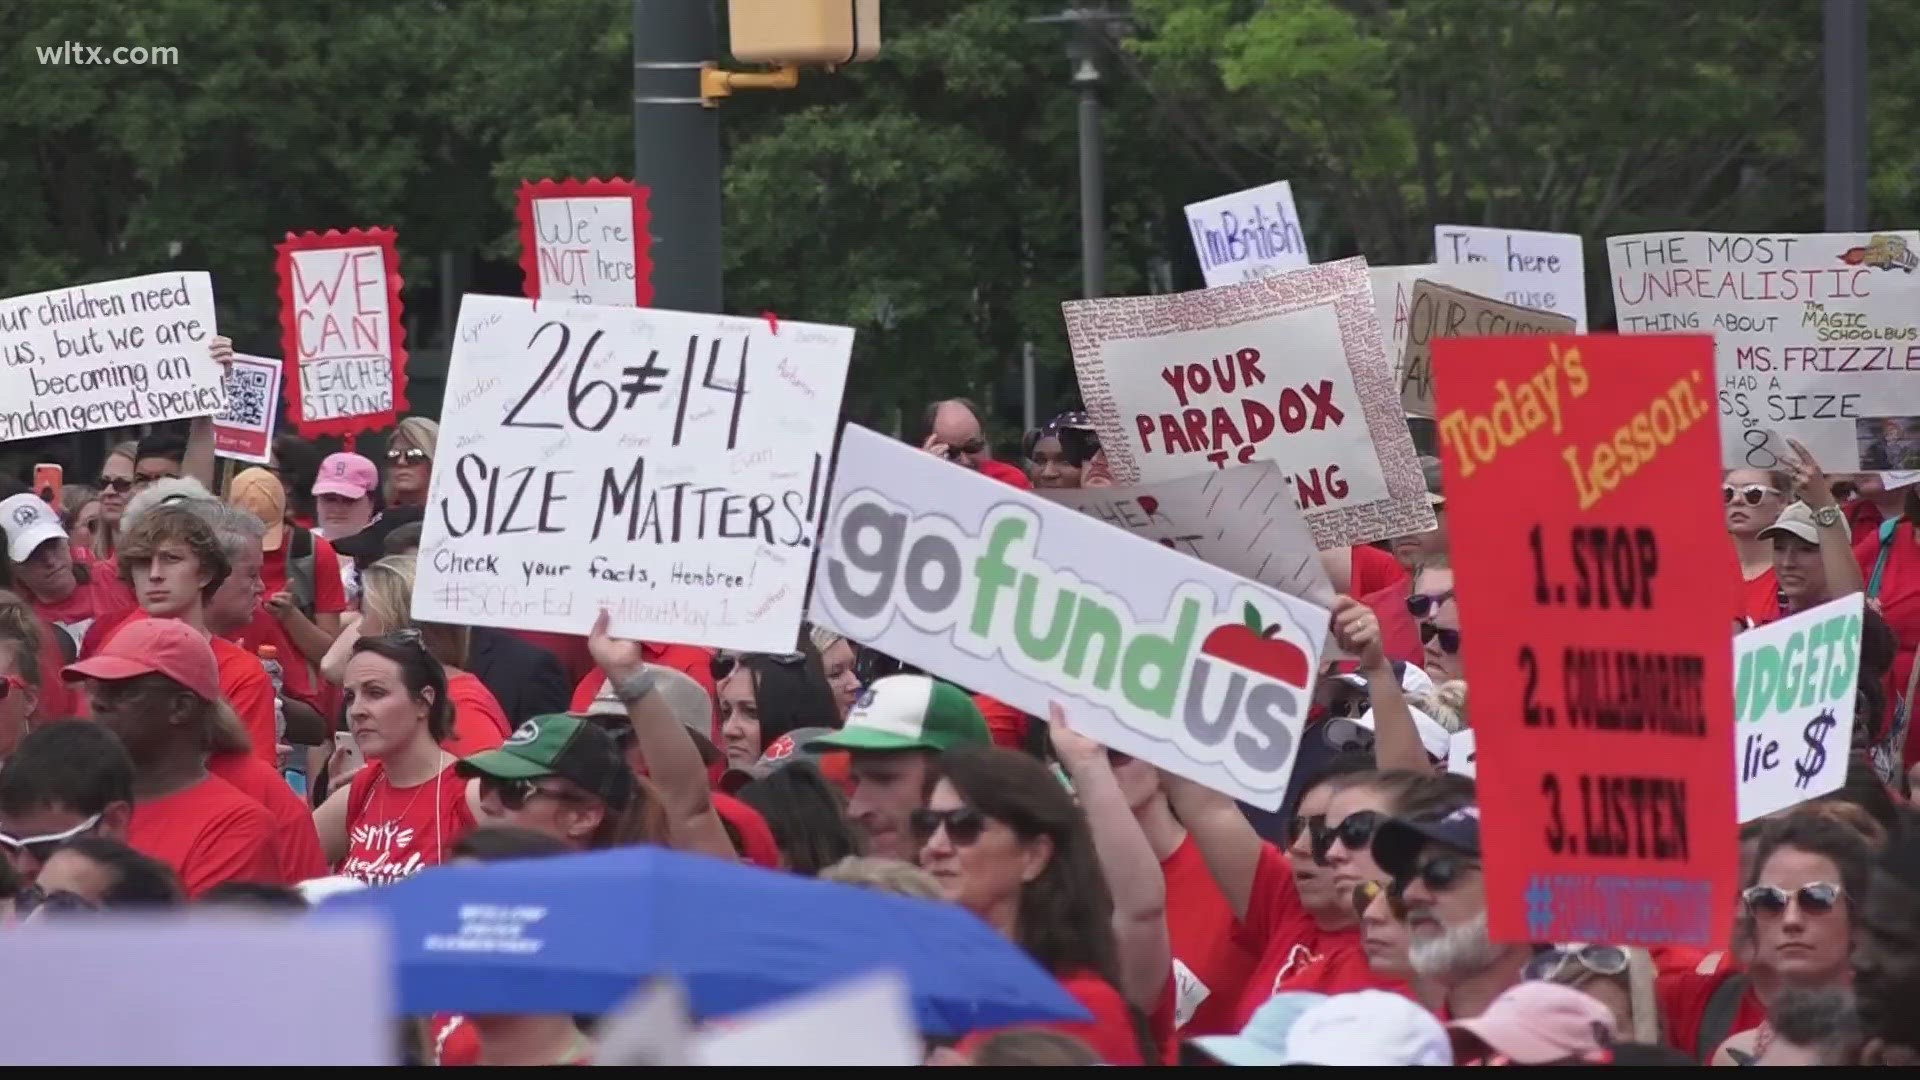 A volunteer group that advocates for teachers in South Carolina says they're scaling back nearly all of their efforts as an organization.